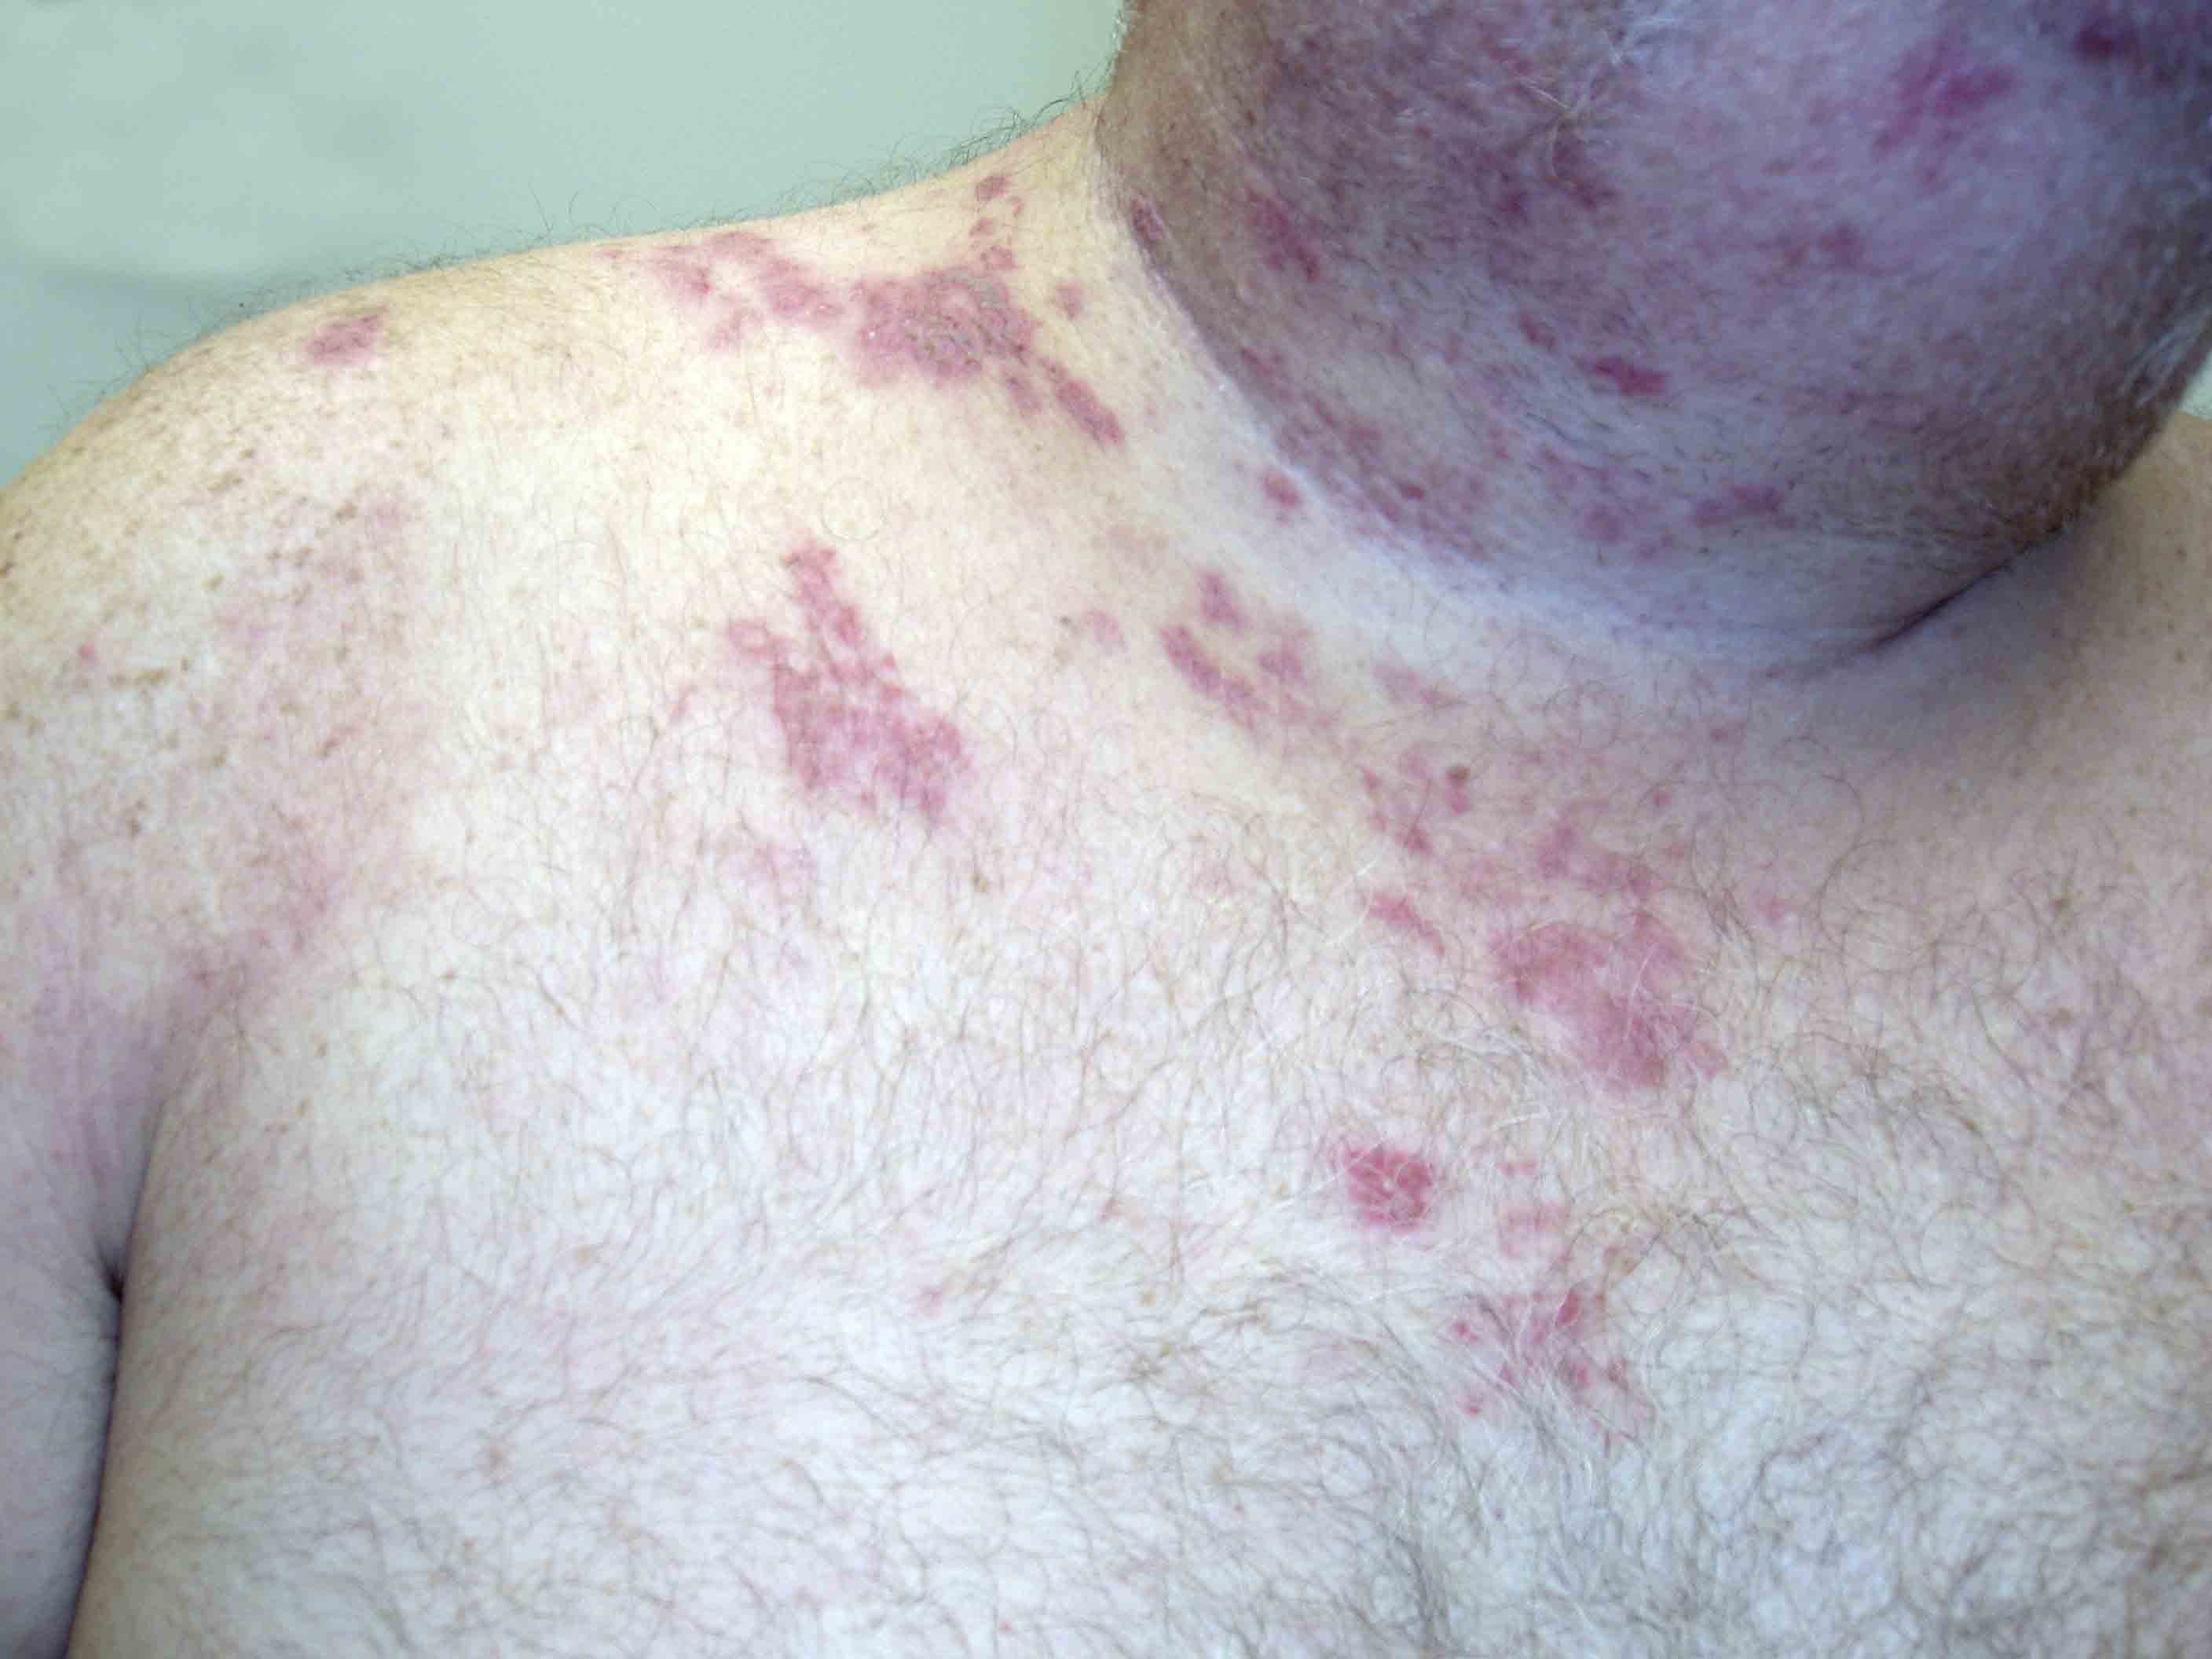 Herpes Zoster C3 Distribution: Dermatomally distributed vesicles, many of which have coalesced, in patient with HZV infection.